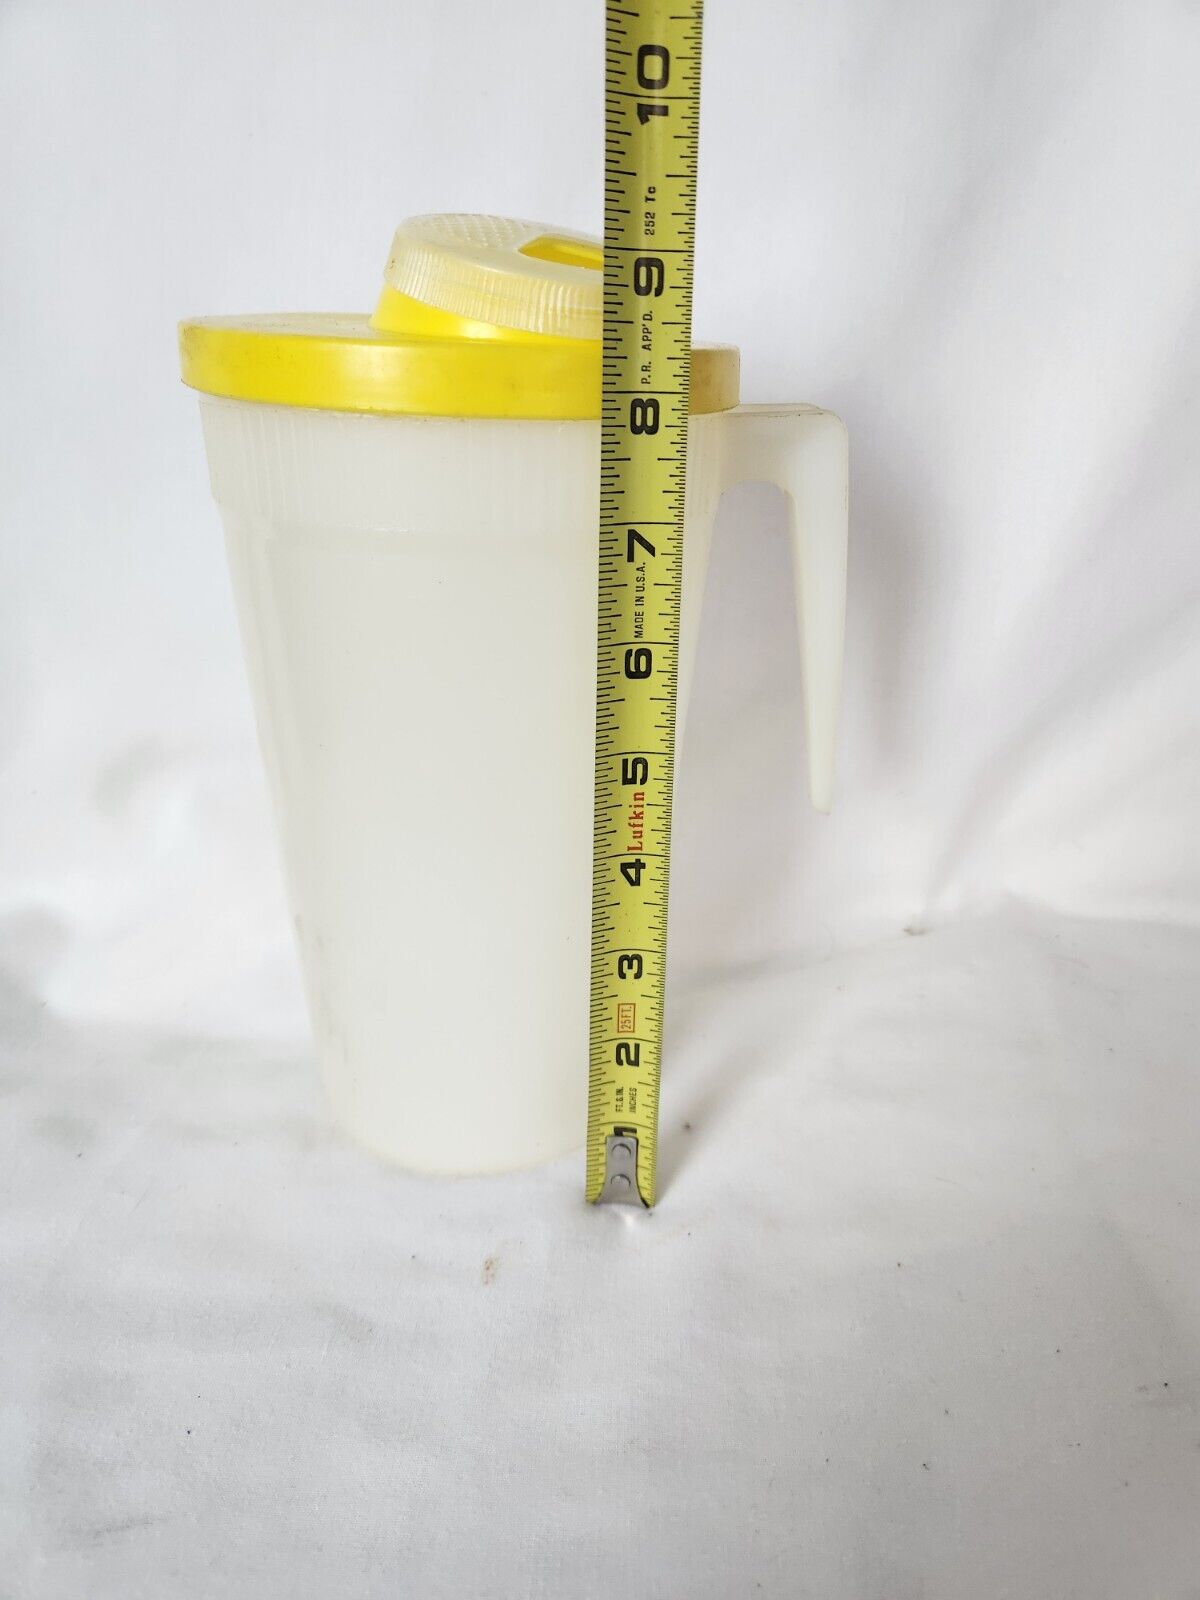 Vintage Plastic Drink Pitcher Clear With Yellow Lid BUP